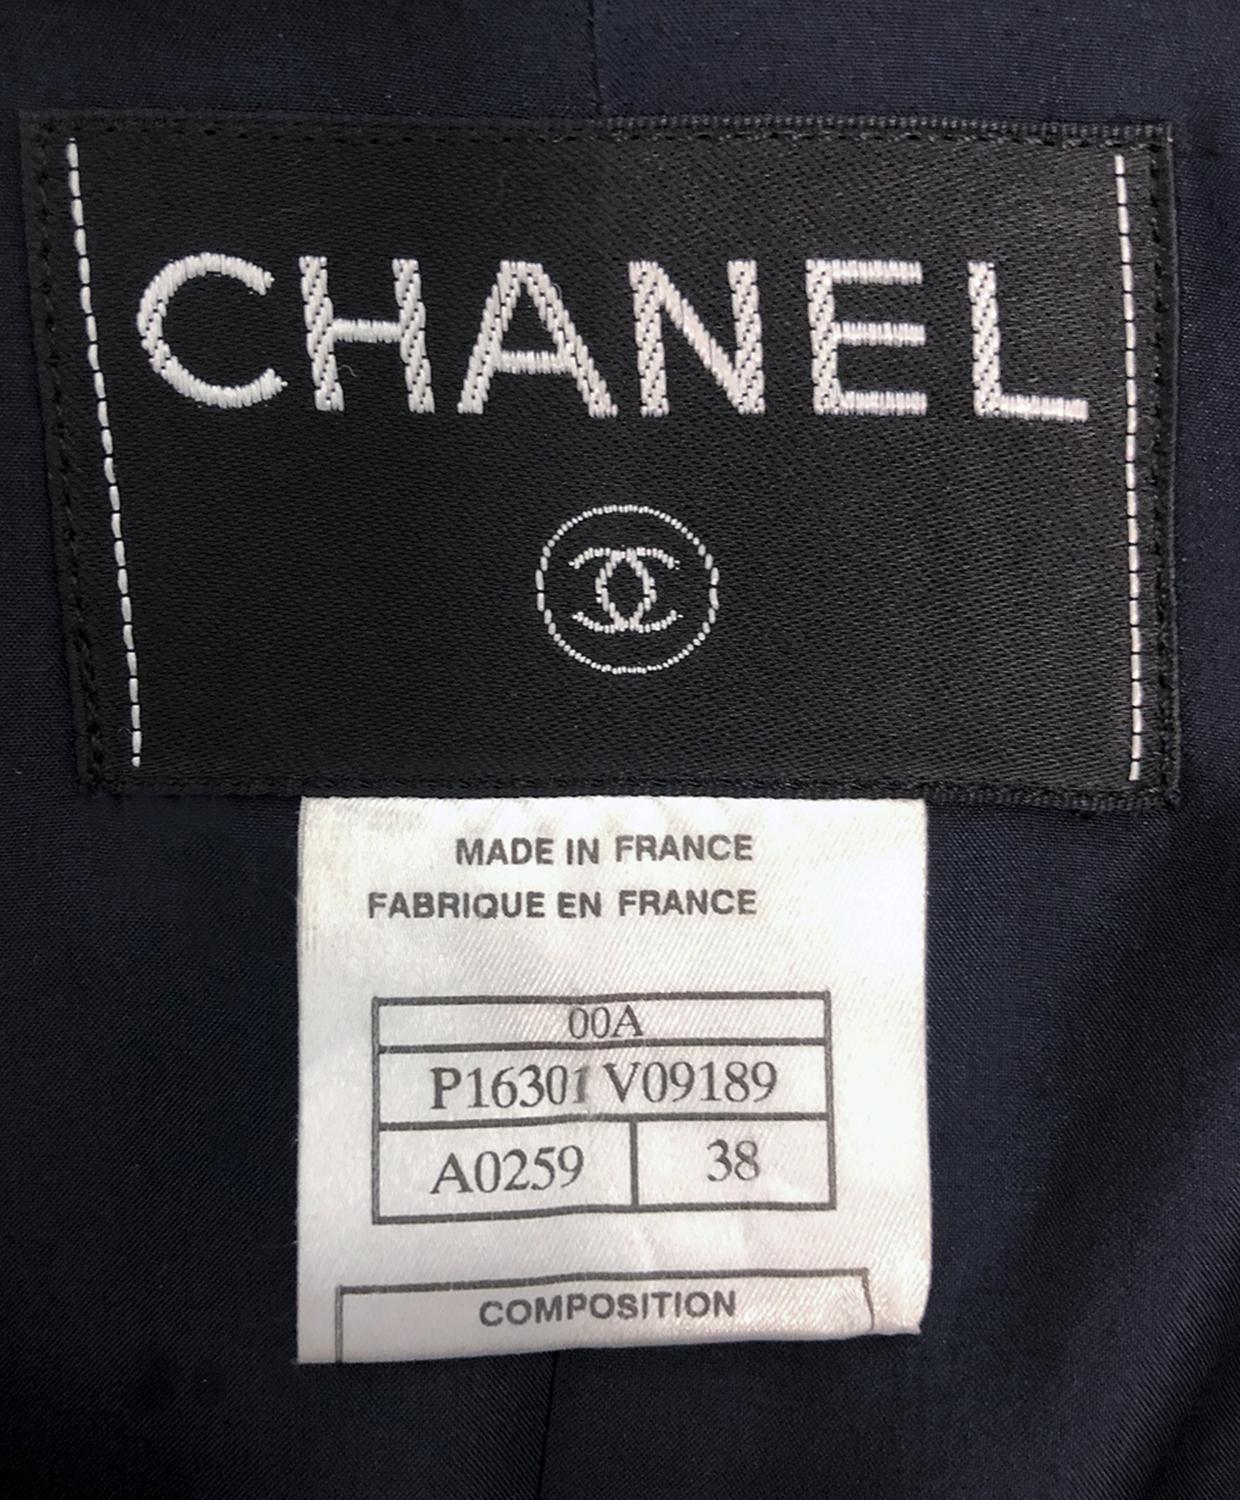 Chanel Rare Collectible Vintage Tweed Coat with Belt For Sale 6